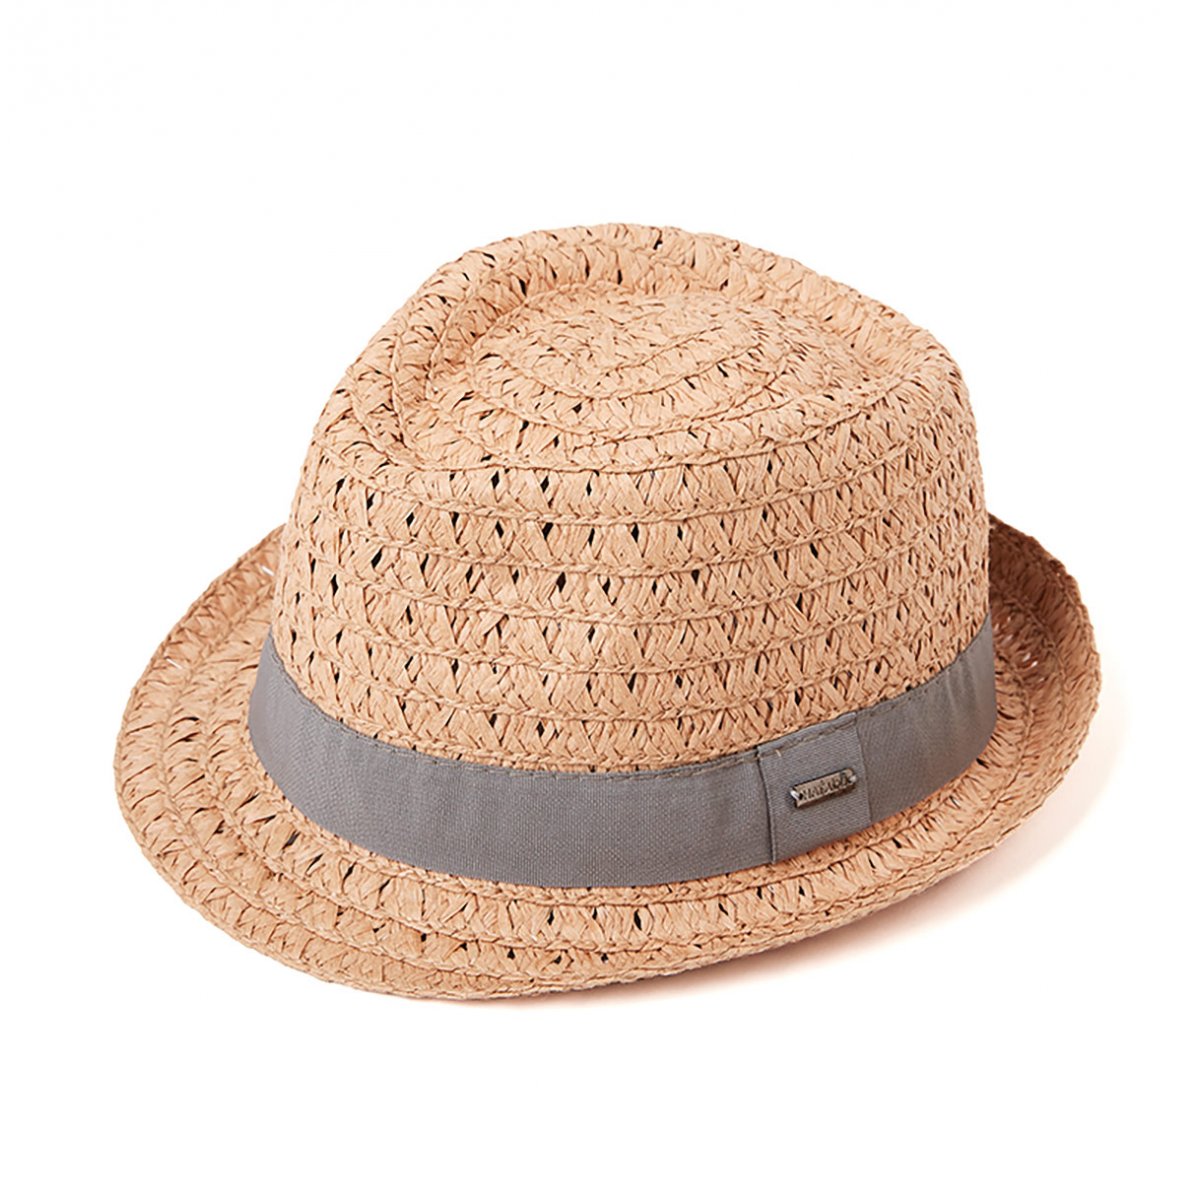 Trilby summerhat with fabric hatband --> Online Hatshop for hats ...